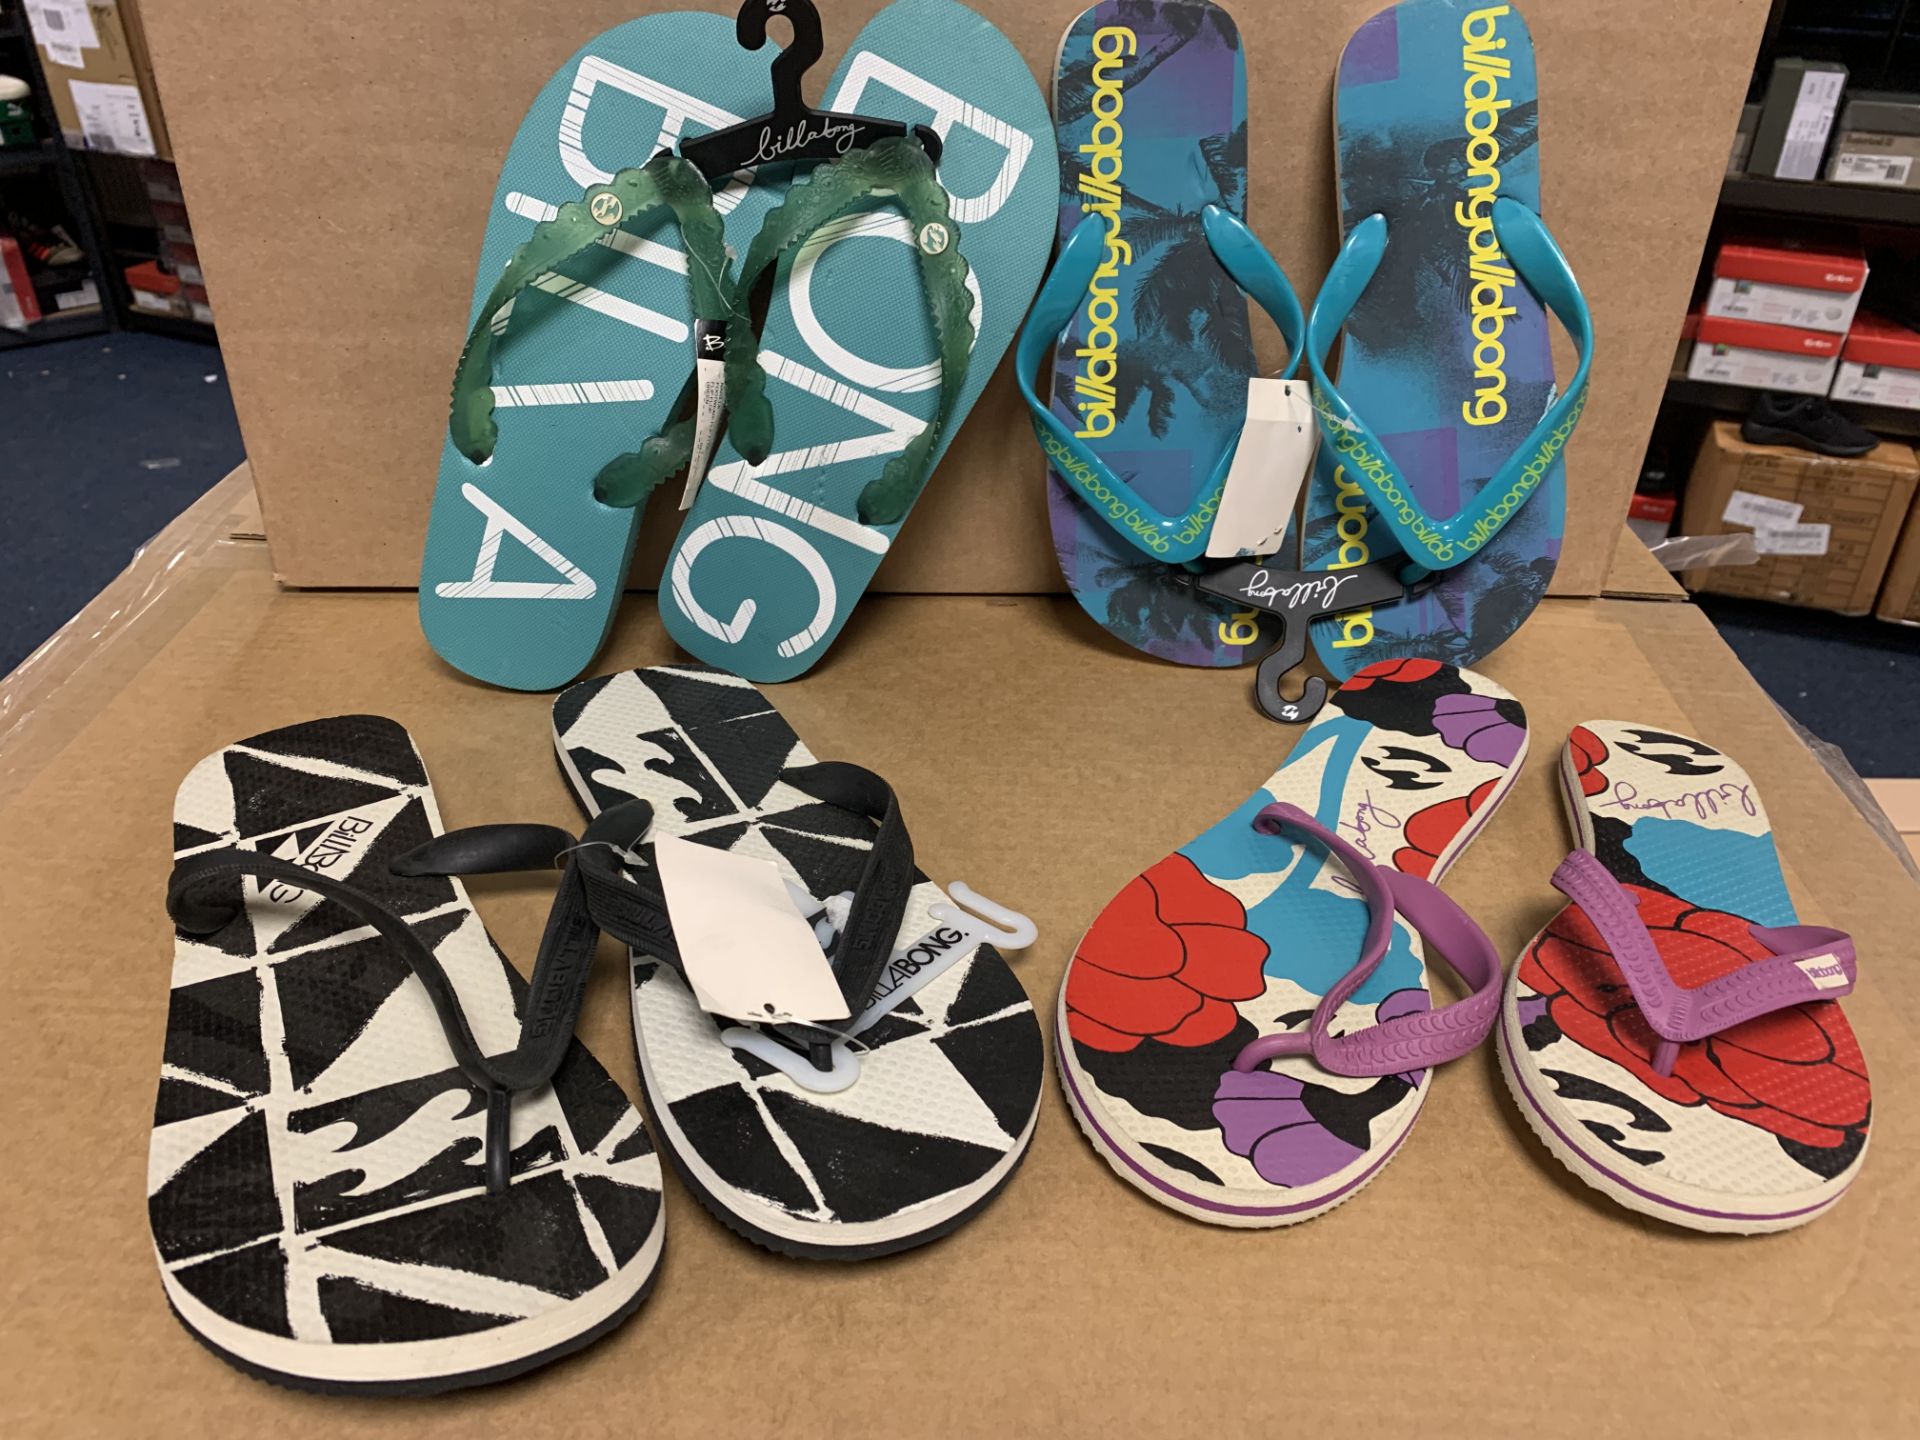 20 X BRAND NEW BILLABONG FLIP FLOPS IN VARIOUS SIZES AND 2 STYLES